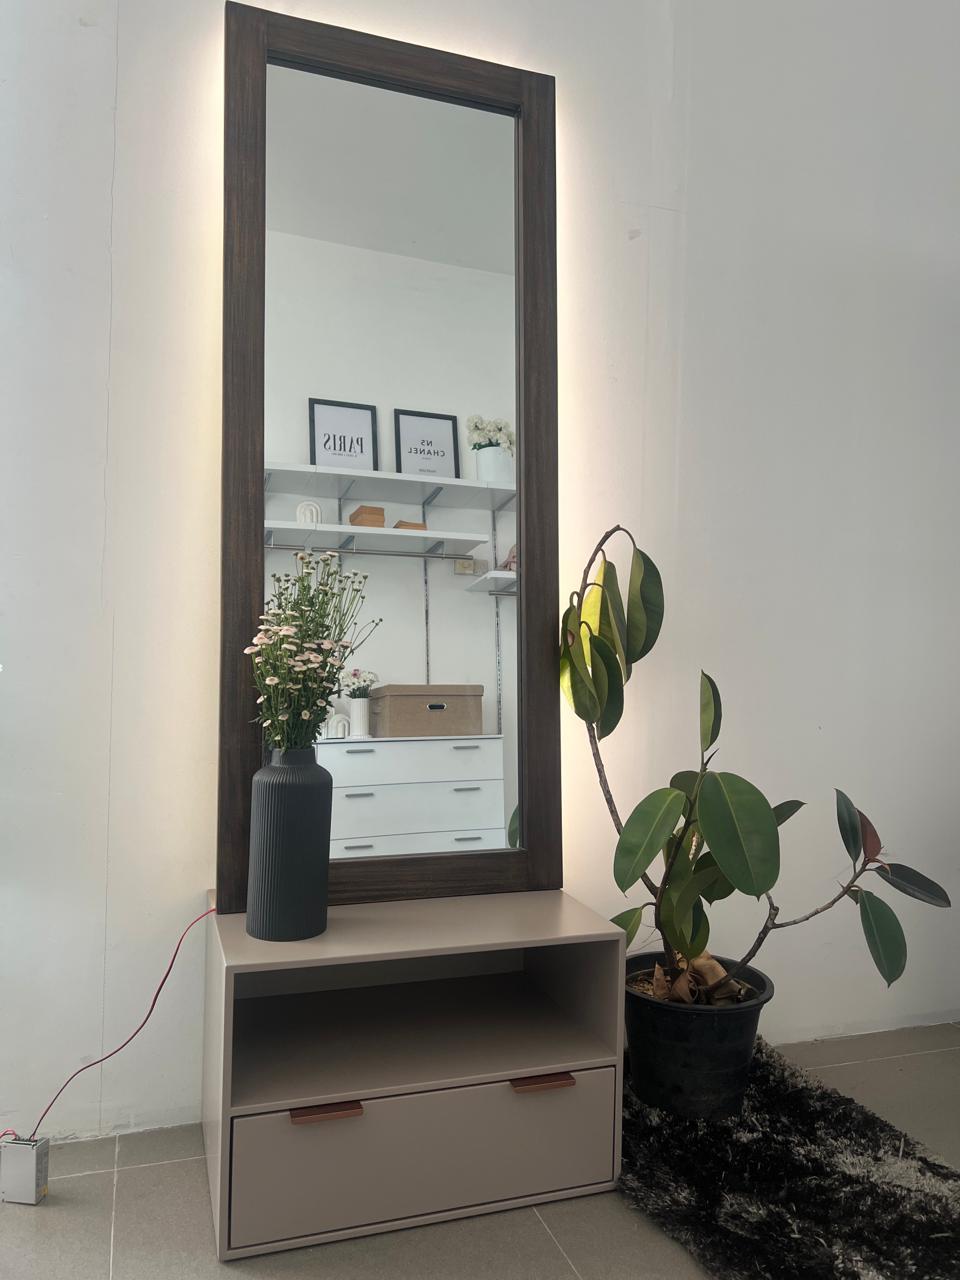 5 x 2 Wooden Mirror - With Lights